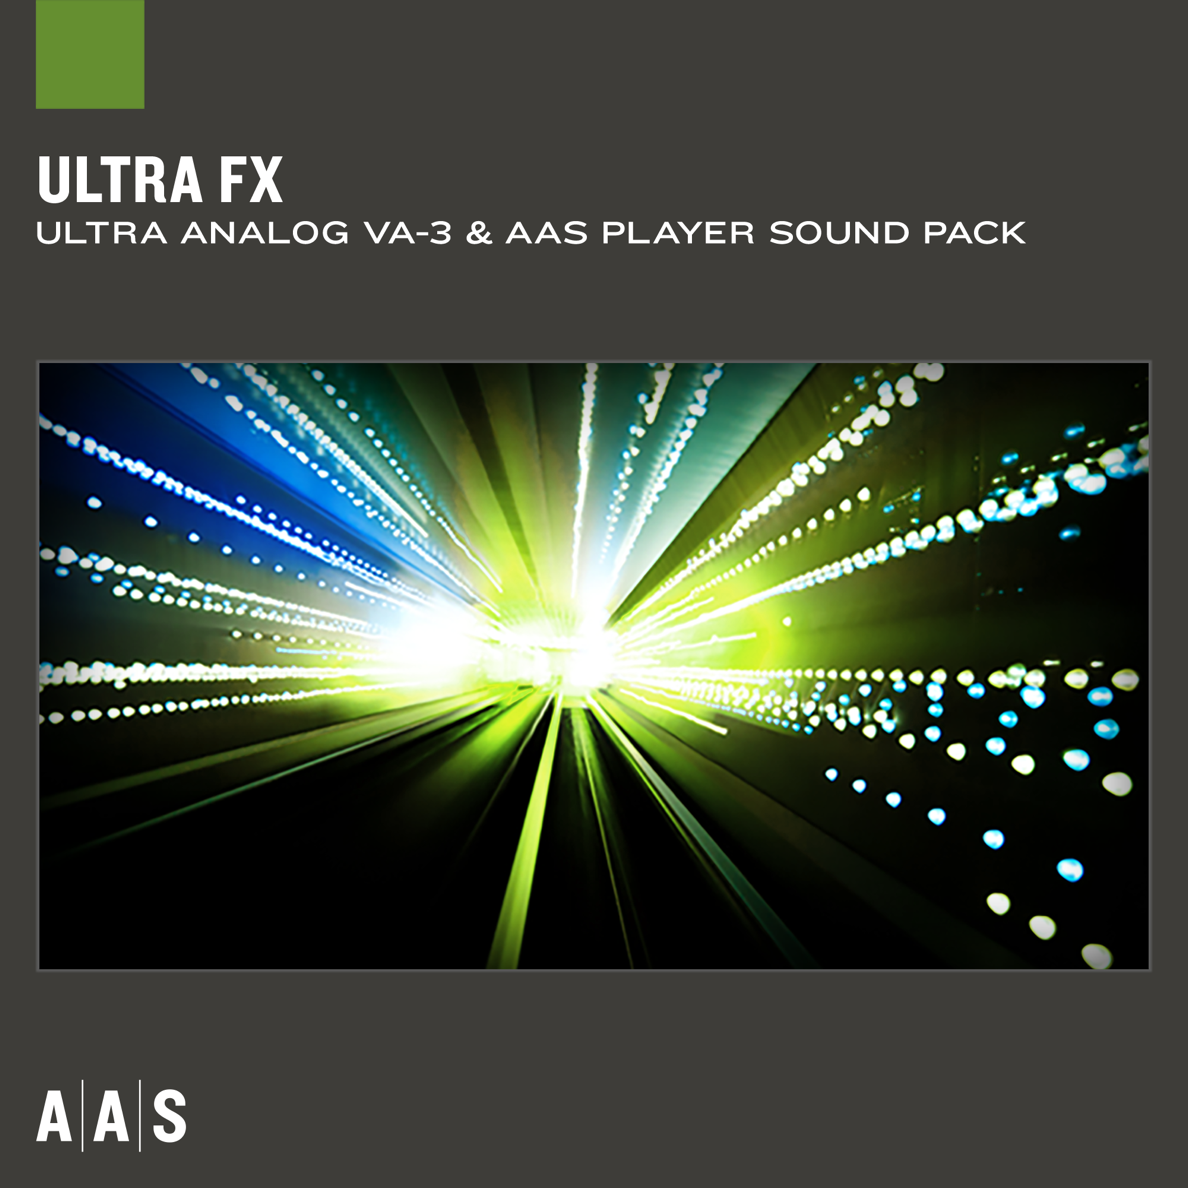 Ultra Analog and AAS Player sound pack ： Ultra FX